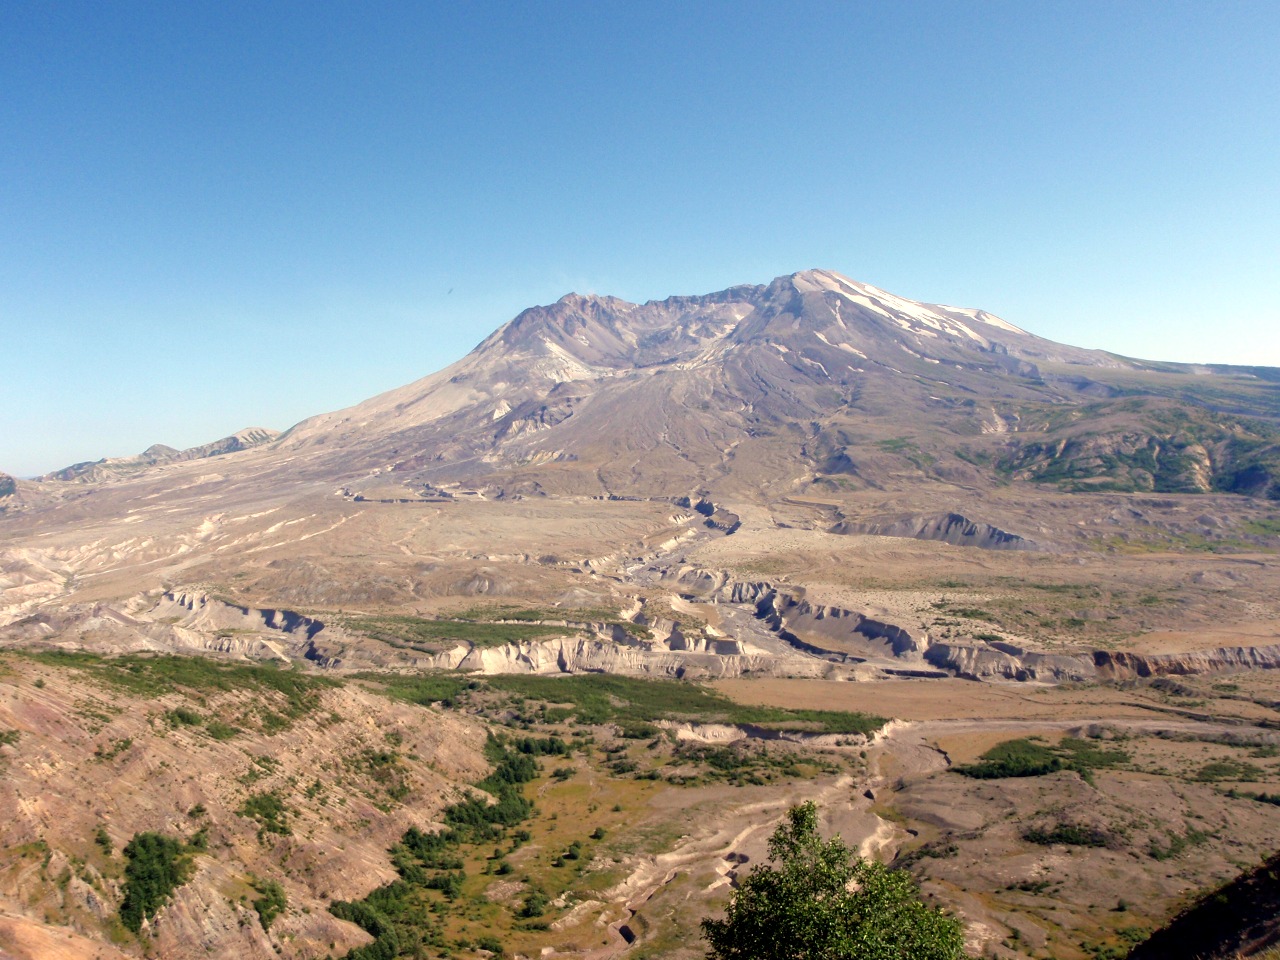 Wednesday: drive to Bellevue, WA. Mt. St. Helens, from the Johnston Observatory